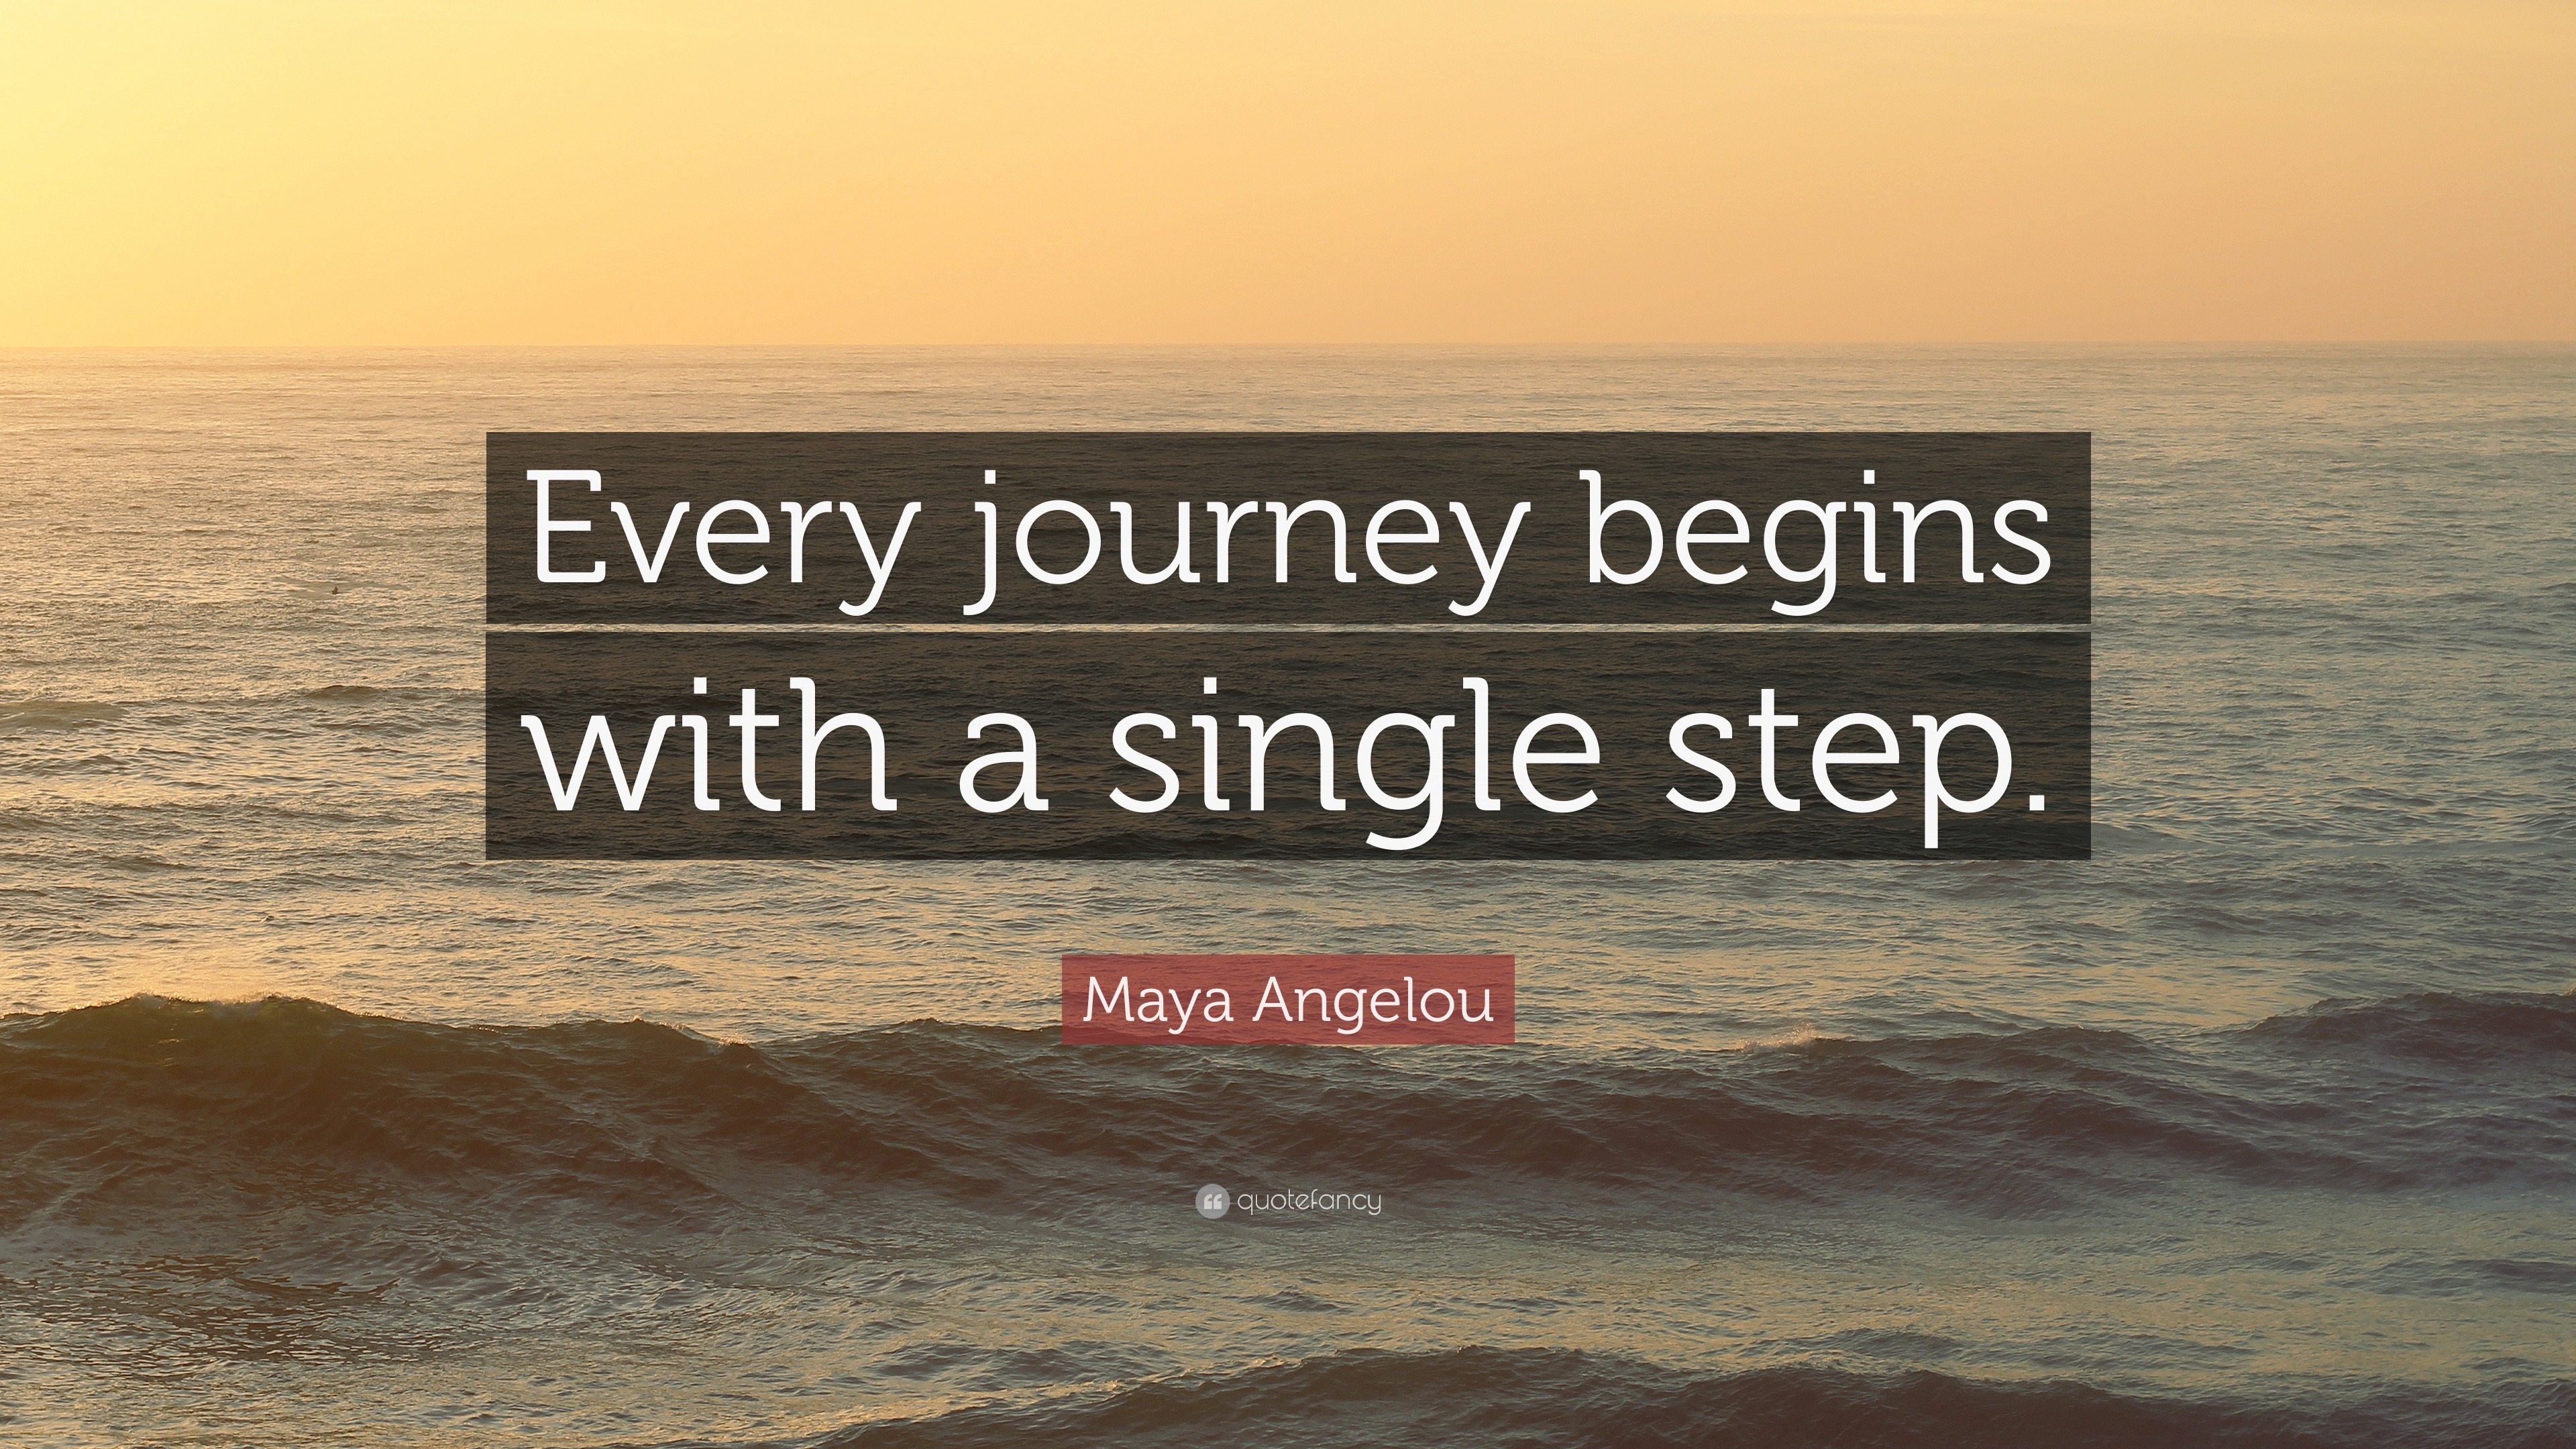 long journey begins with a single step